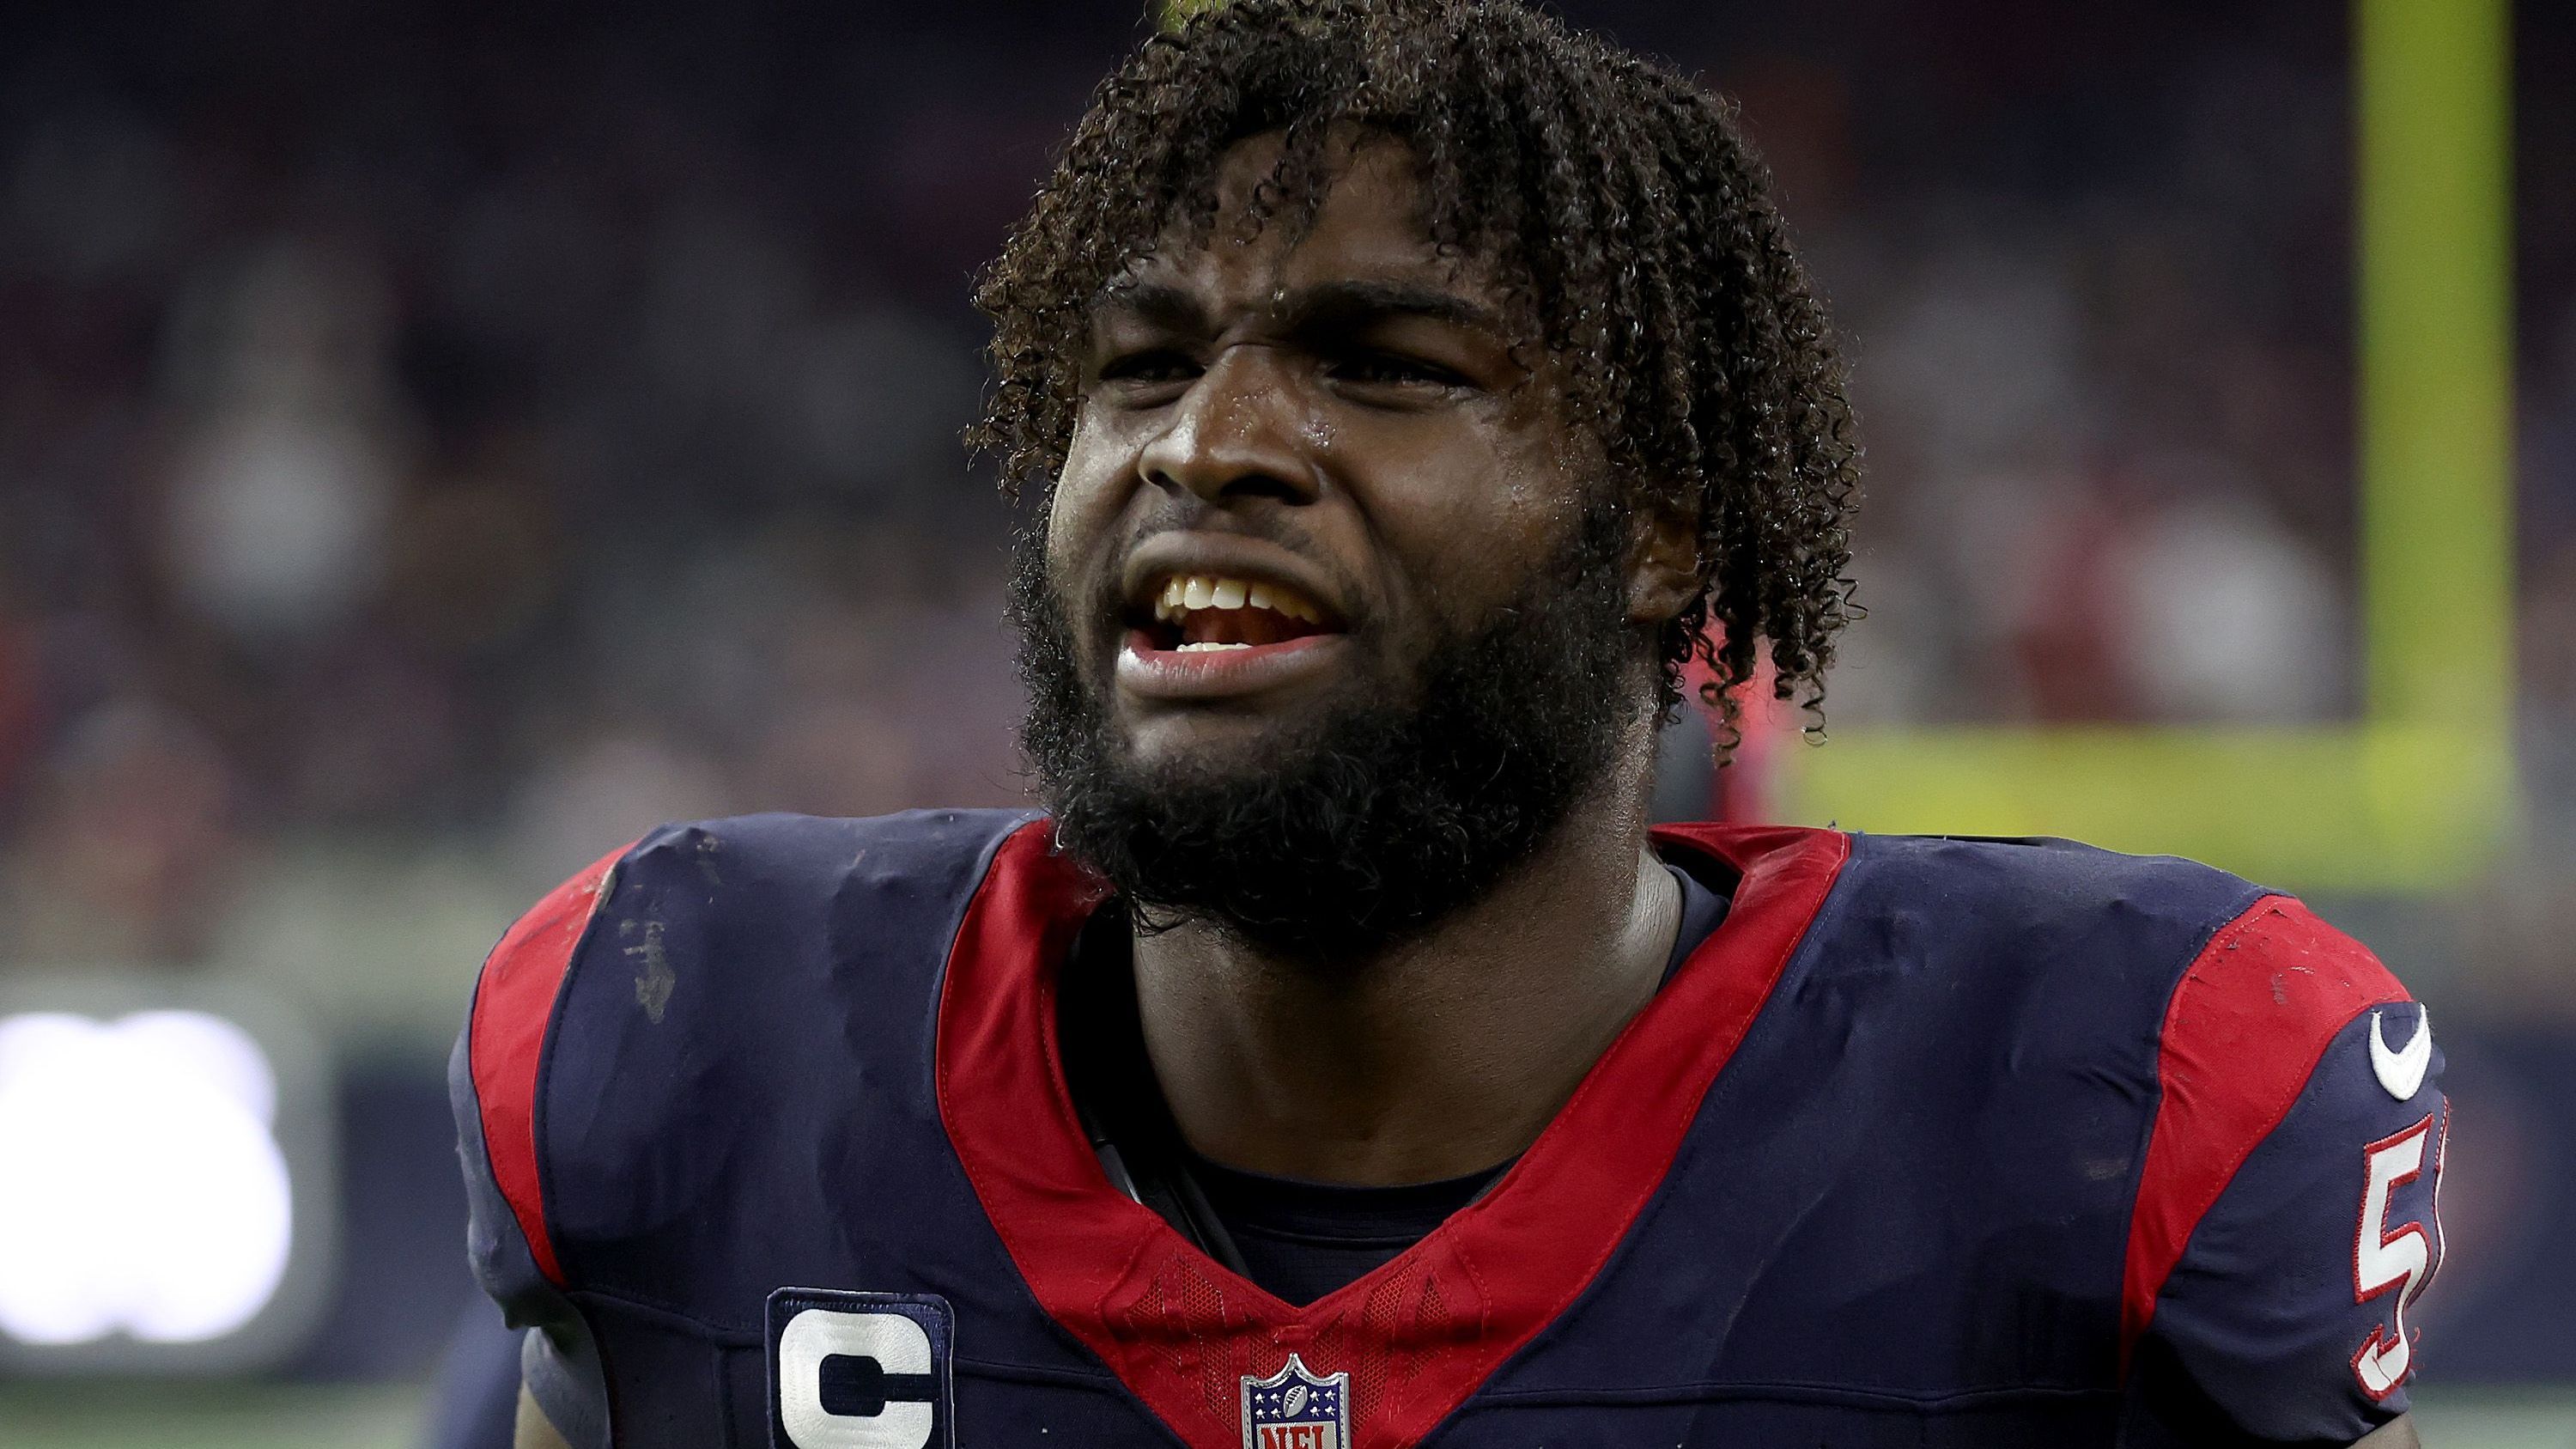 <strong>Defensive Rookie of the Year</strong><br> Will Anderson, Houston Texans, Defensive End<br><strong>Wahlergebnis mit Punkteabstufung 5-3-1:</strong> <br>1. Anderson, 16-21-8 = 151; <br>2. Jalen Carter, Defensive Tackle, Eagles, 14-14-10 = 122<br>3. Kobie Turner, Defensive Tackle, Rams, 14-6-7 = 95<br>4. Devon Witherspoon, Cornerback, Seahawks, 4-7-16 = 57<br>5. Joey Porter Jr., Cornerback, Steelers, 1-0-1 = 6